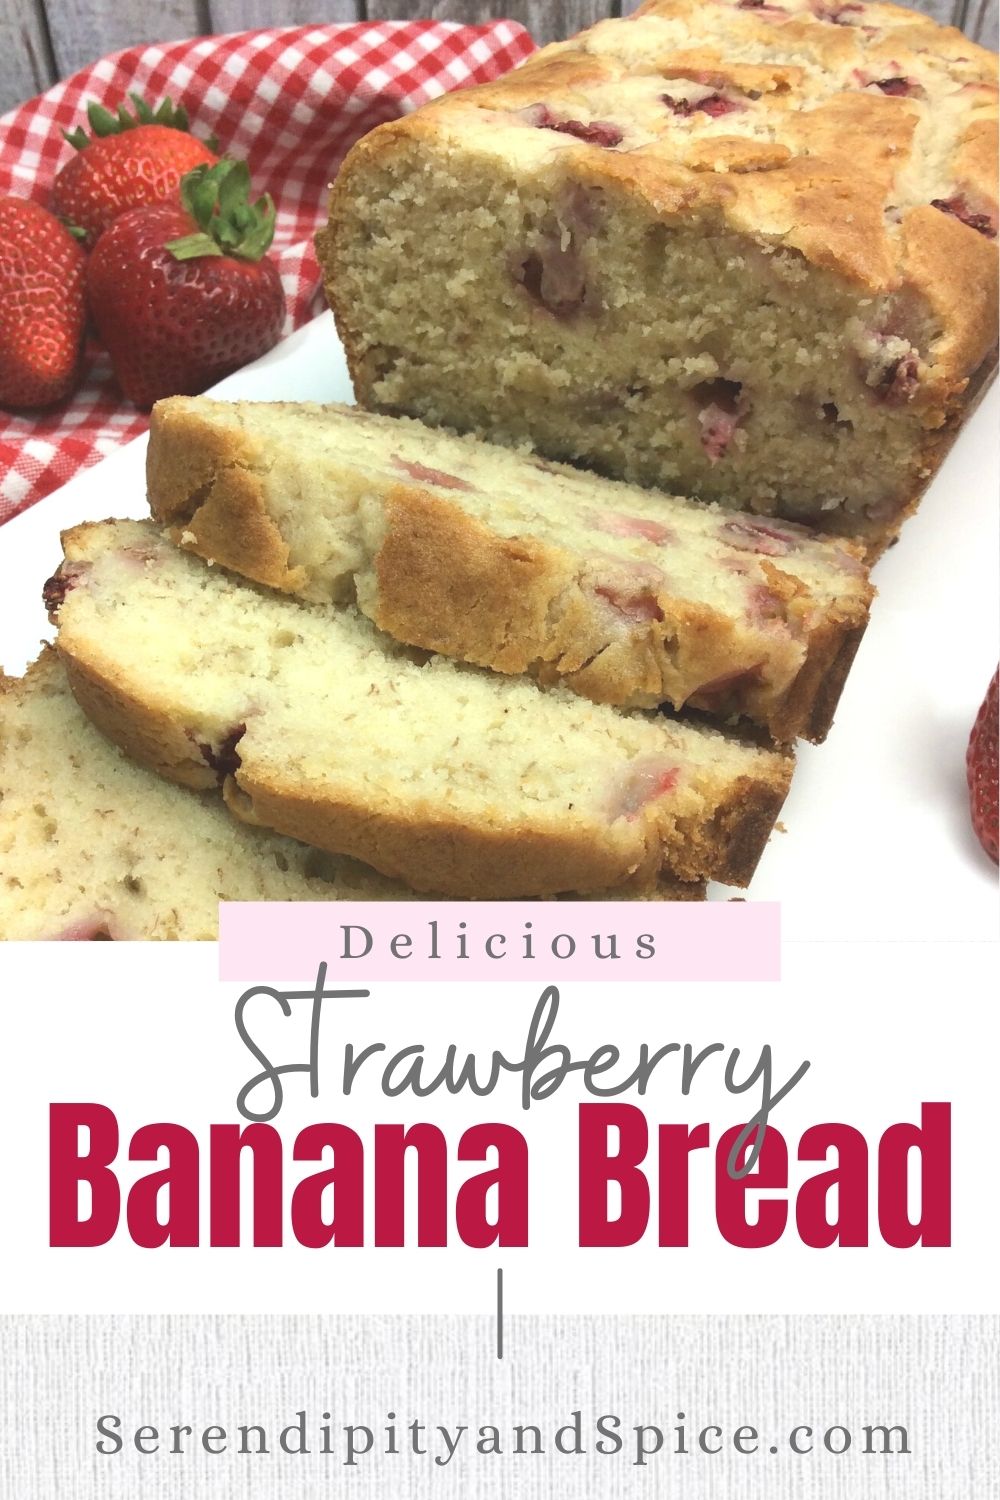 This Strawberry Banana Bread Recipe is a family favorite.  The sweet taste of banana bread with the tart addition of strawberries makes this Strawberry Banana Bread an easy recipe perfect for breakfast or dessert! A perfect recipe to bake with kids....baking with kids...